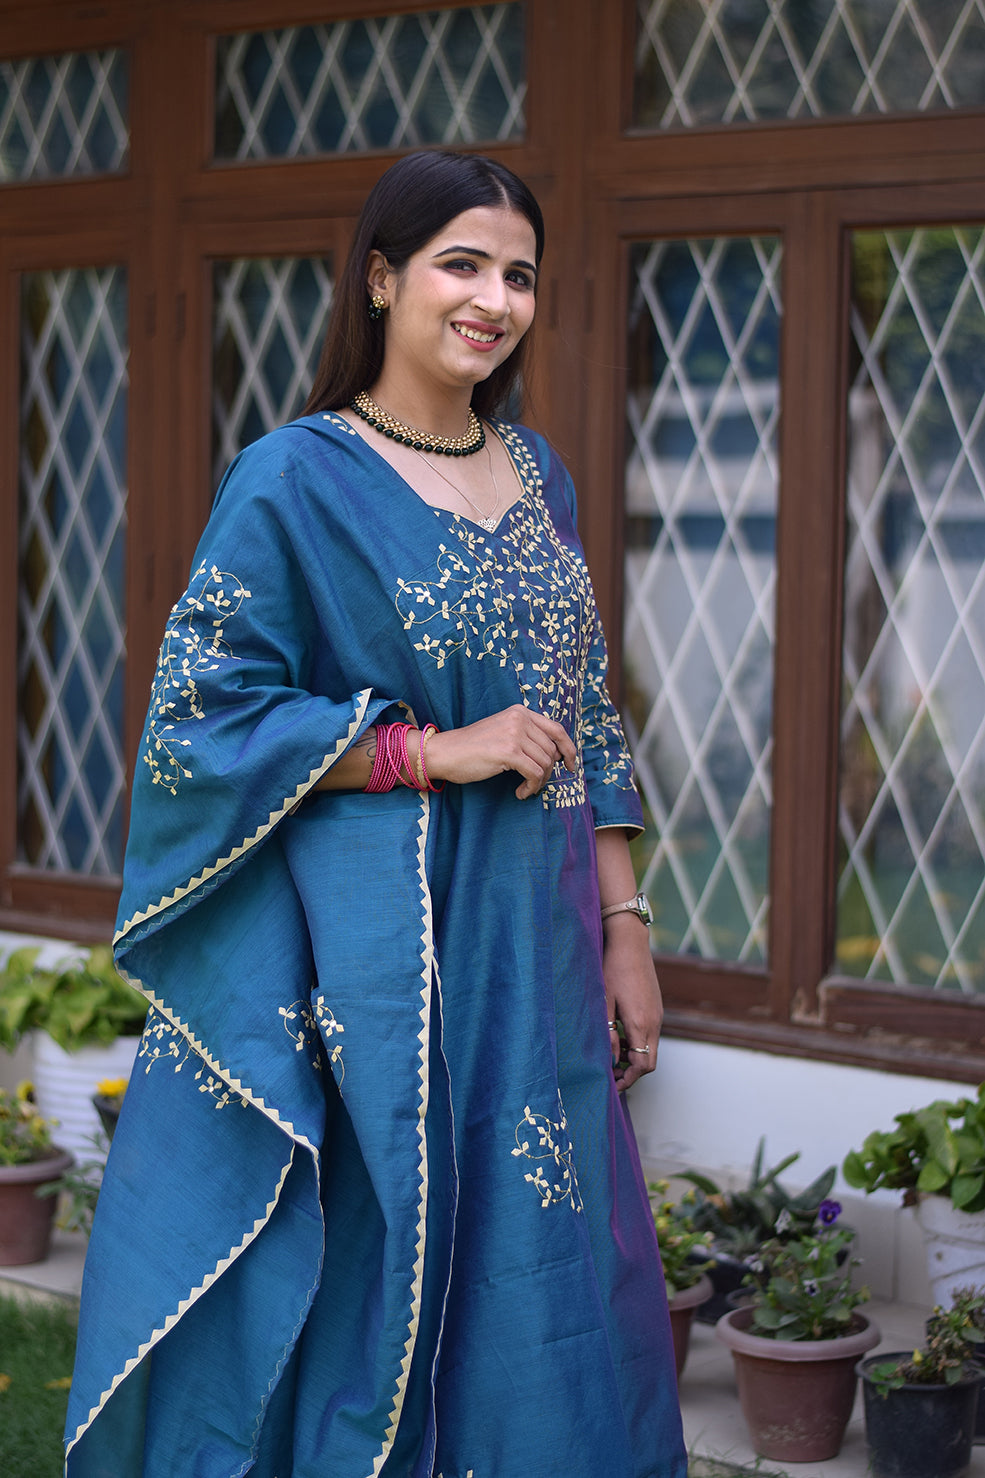 A beautifully dressed Indian woman in a blue applique work suit looking directly at the camera.